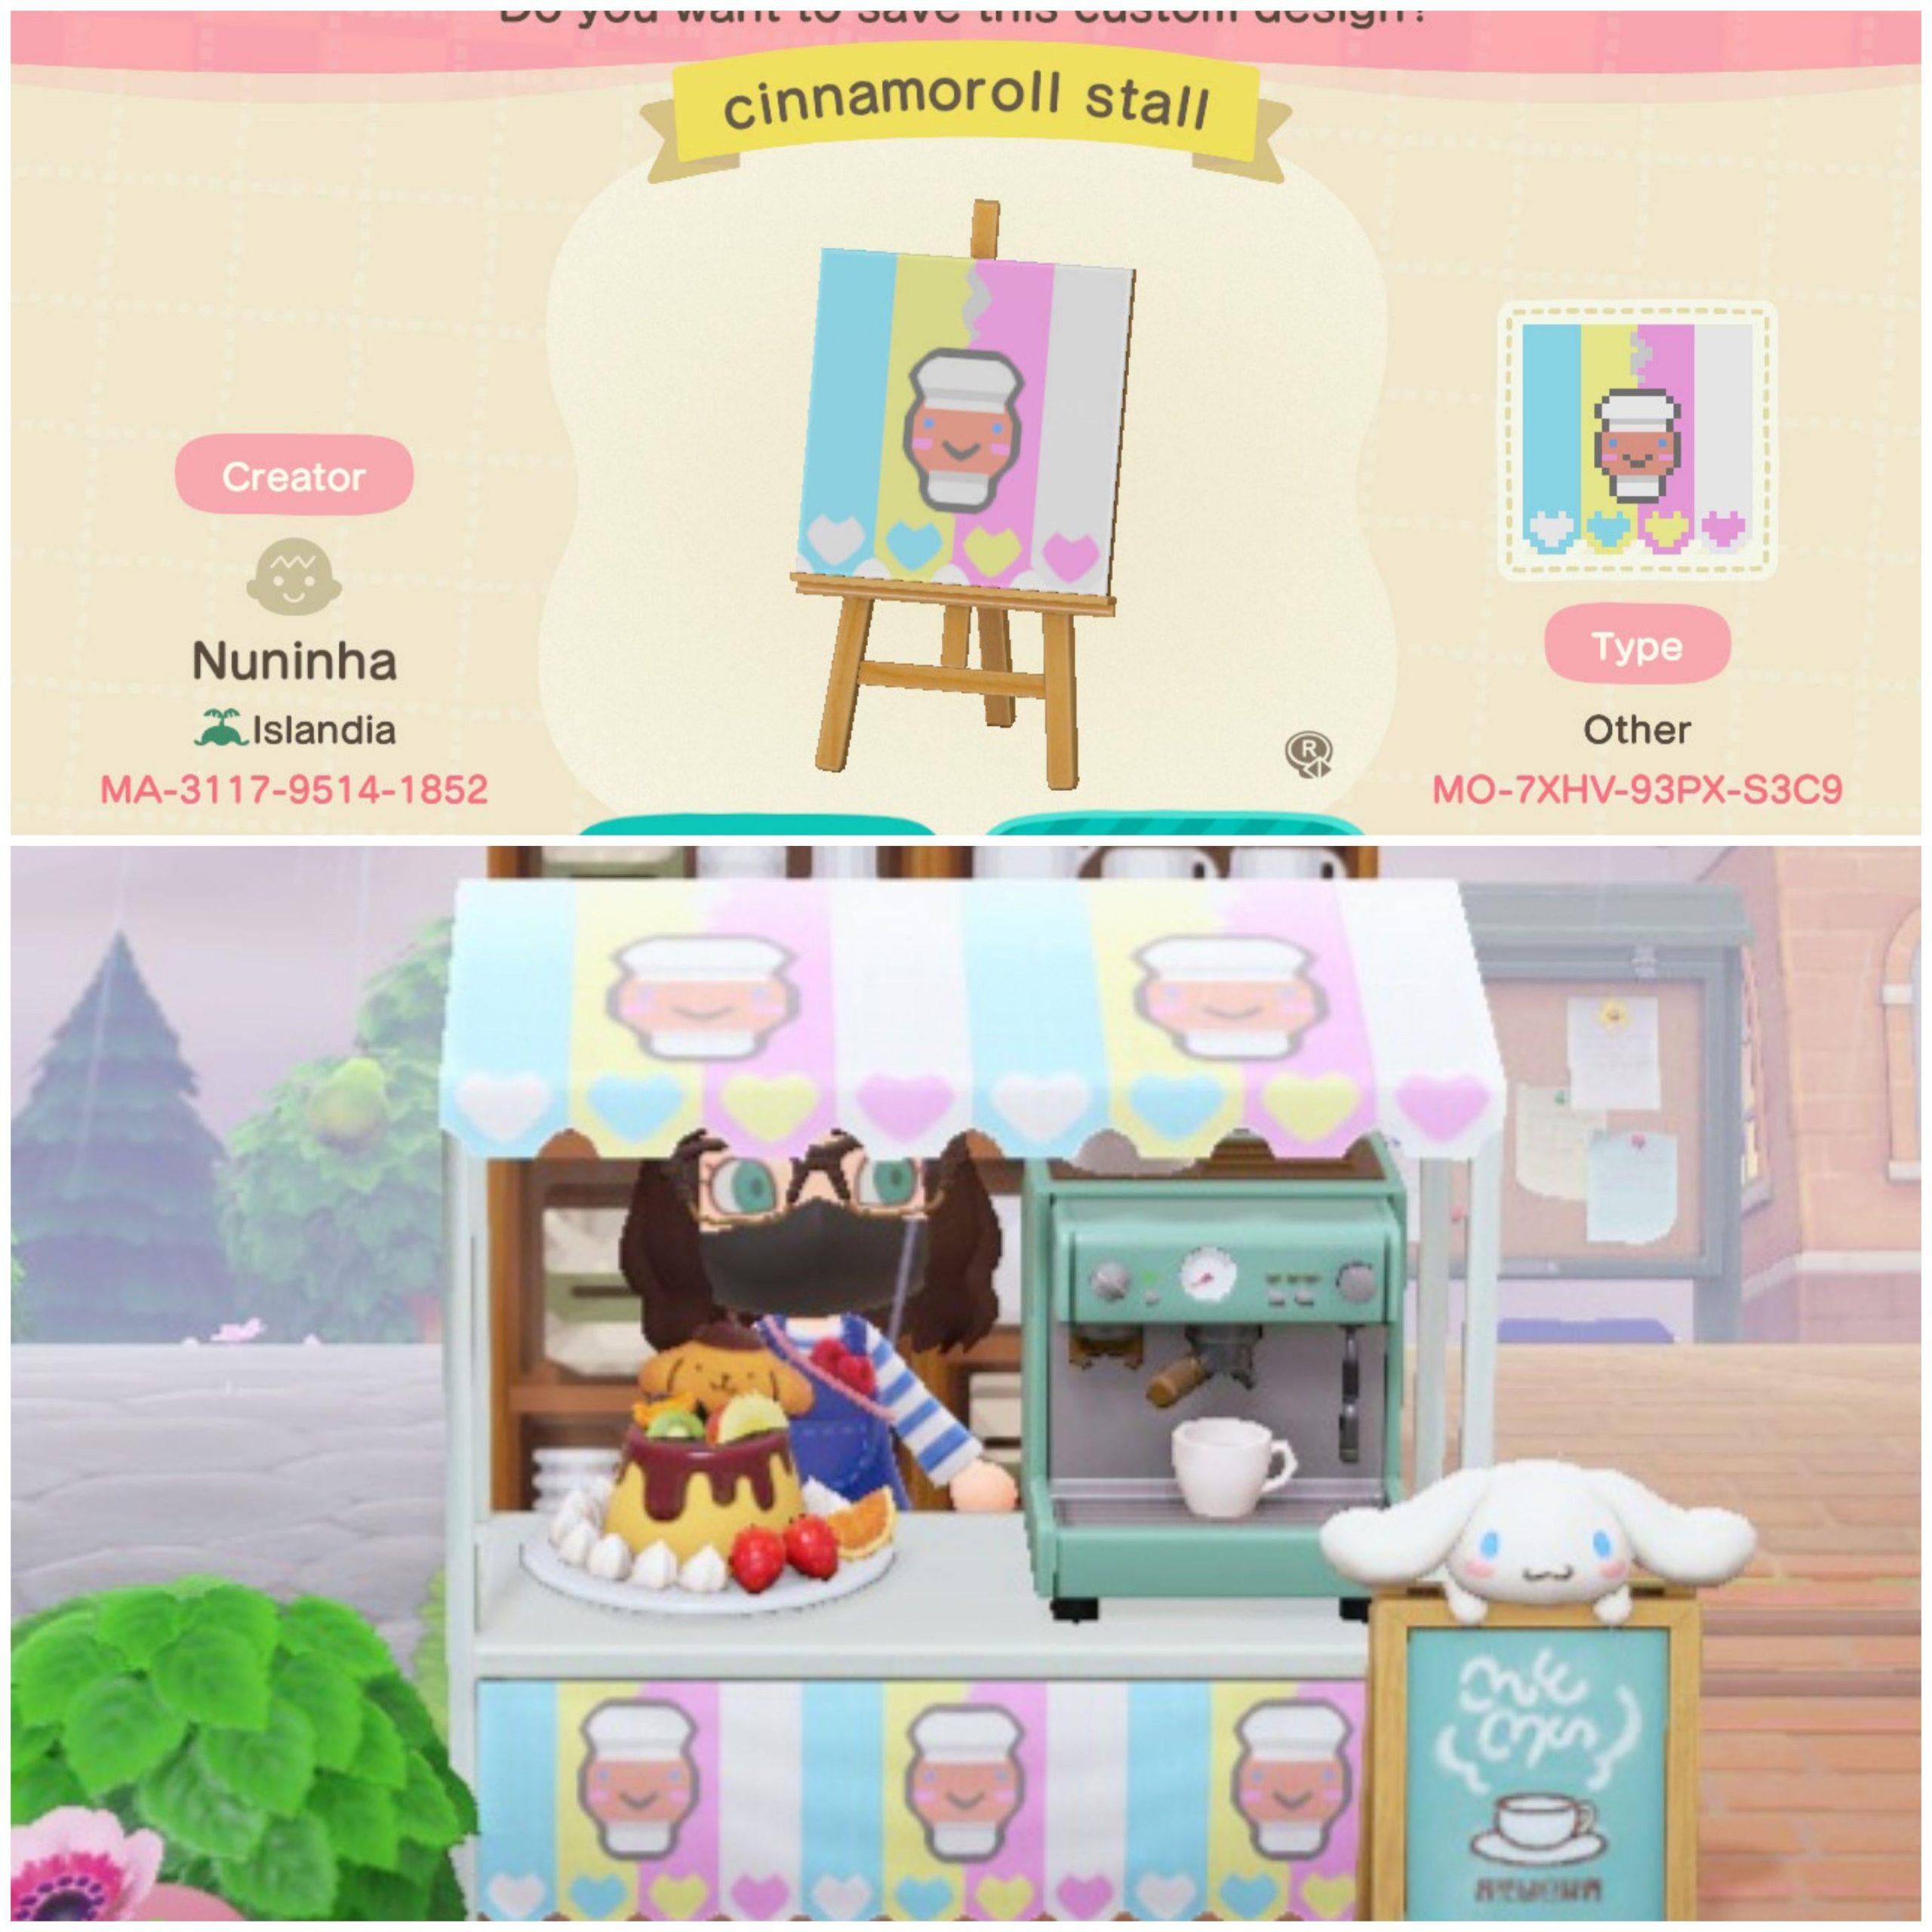 My first upload to the design portal - A Cinnamoroll Café stall